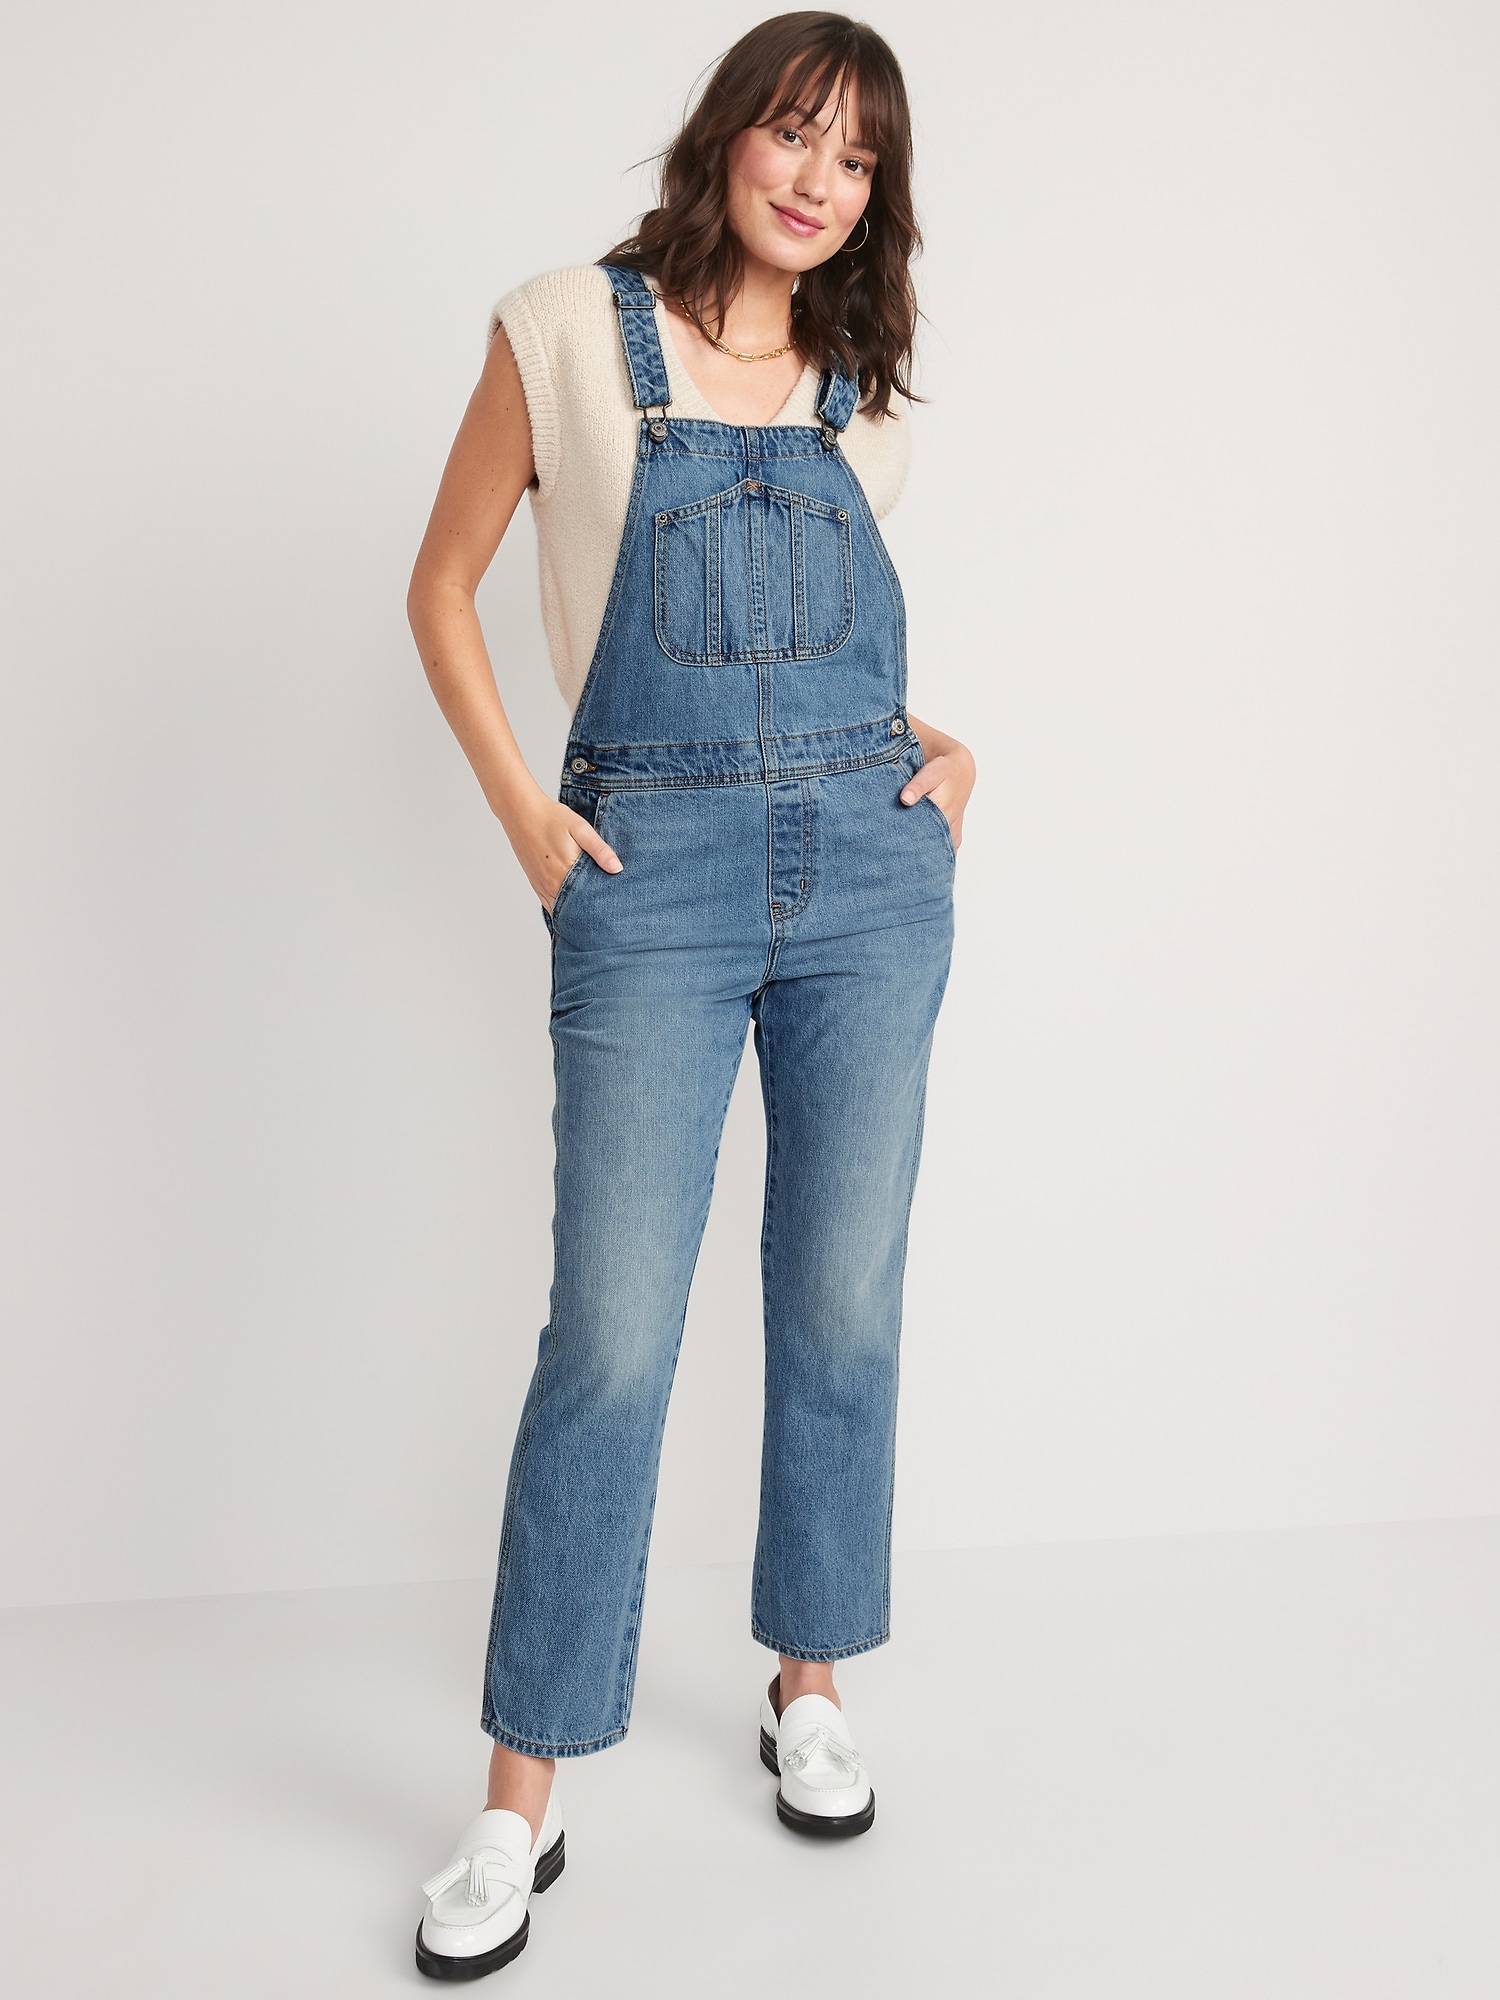 Old Navy Slouchy Straight Non-Stretch Jean Overalls for Women blue. 1